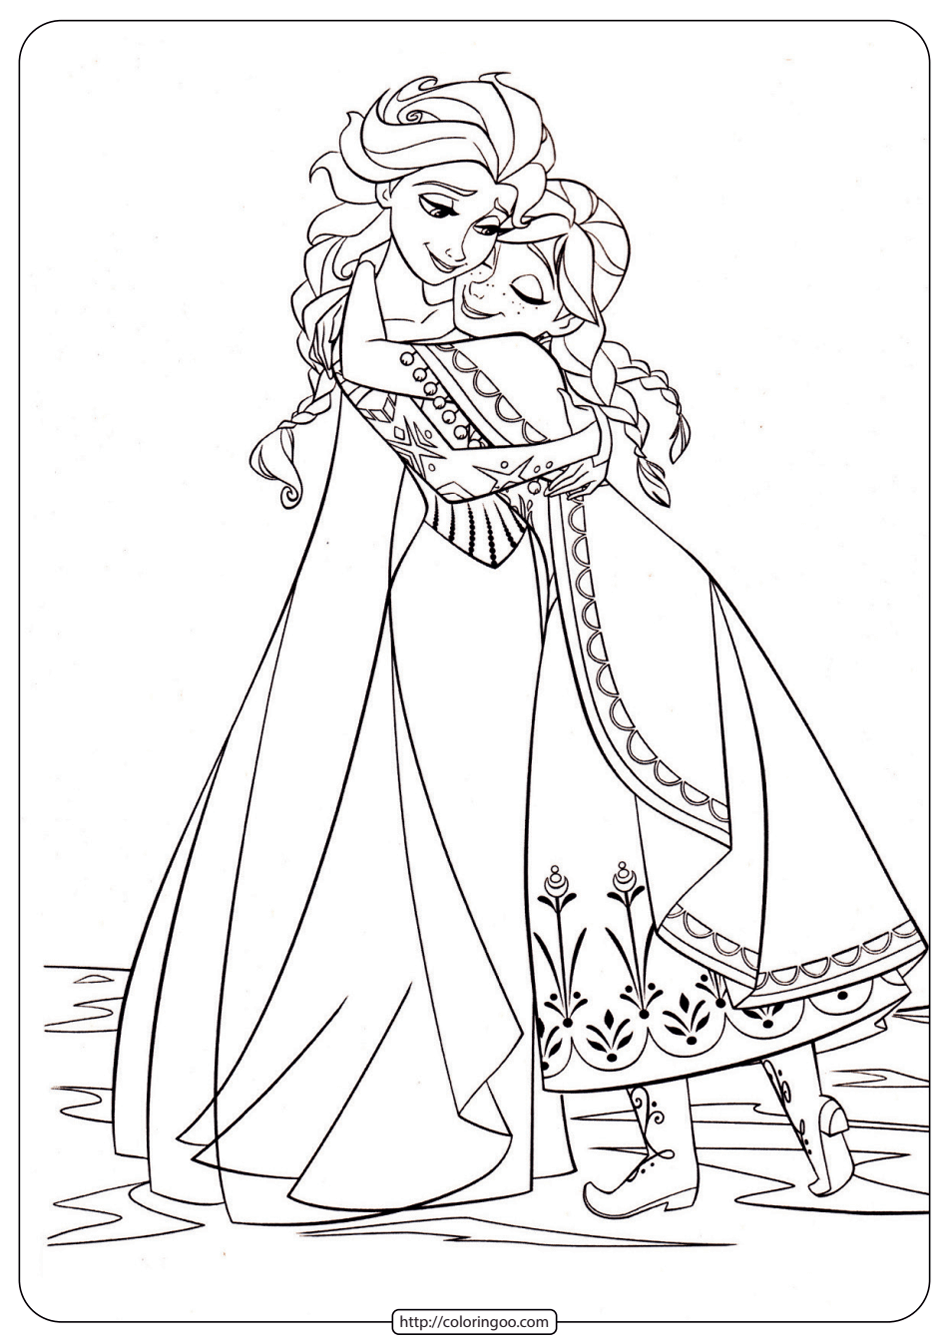 disney frozen anna and elsa pdf coloring pages